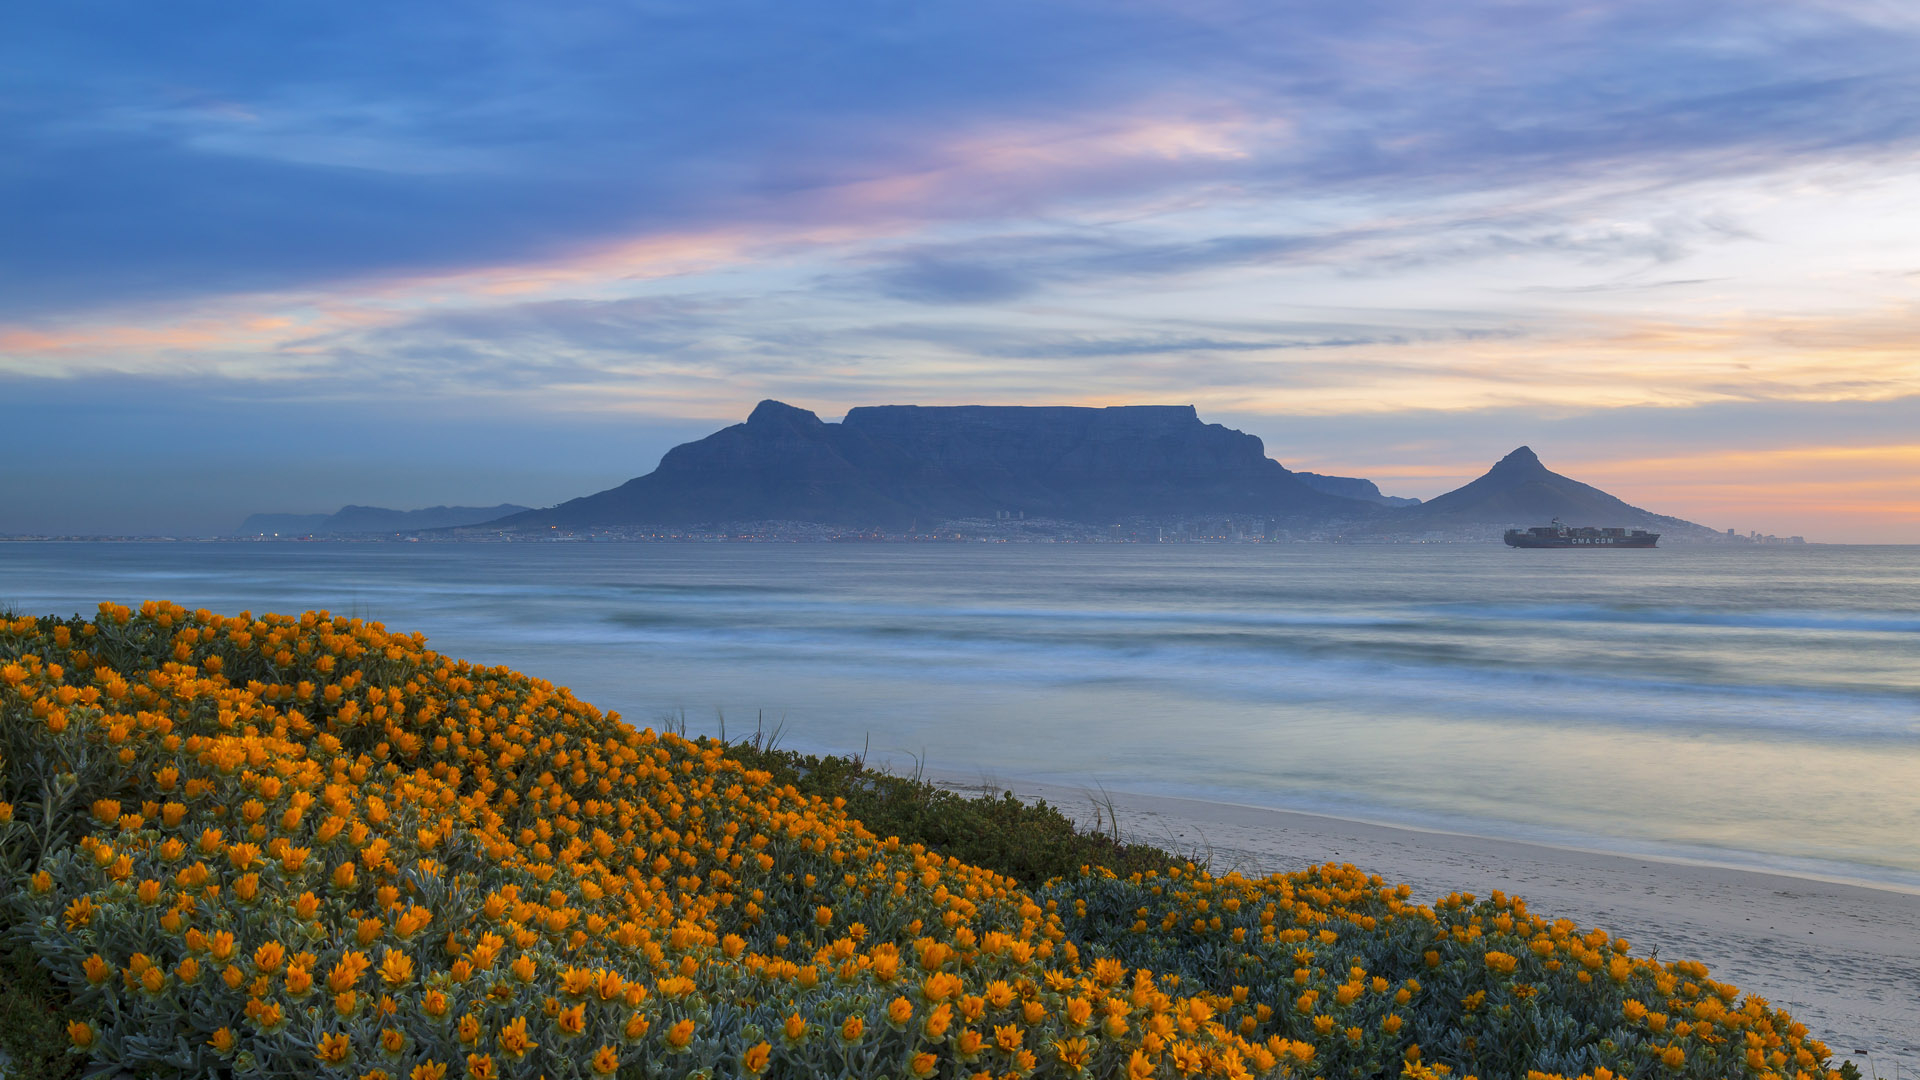 1920x1080 Table Mountain at sunset with spring flowers along the coastline, South Africa | Windows 10 Spotlight Images